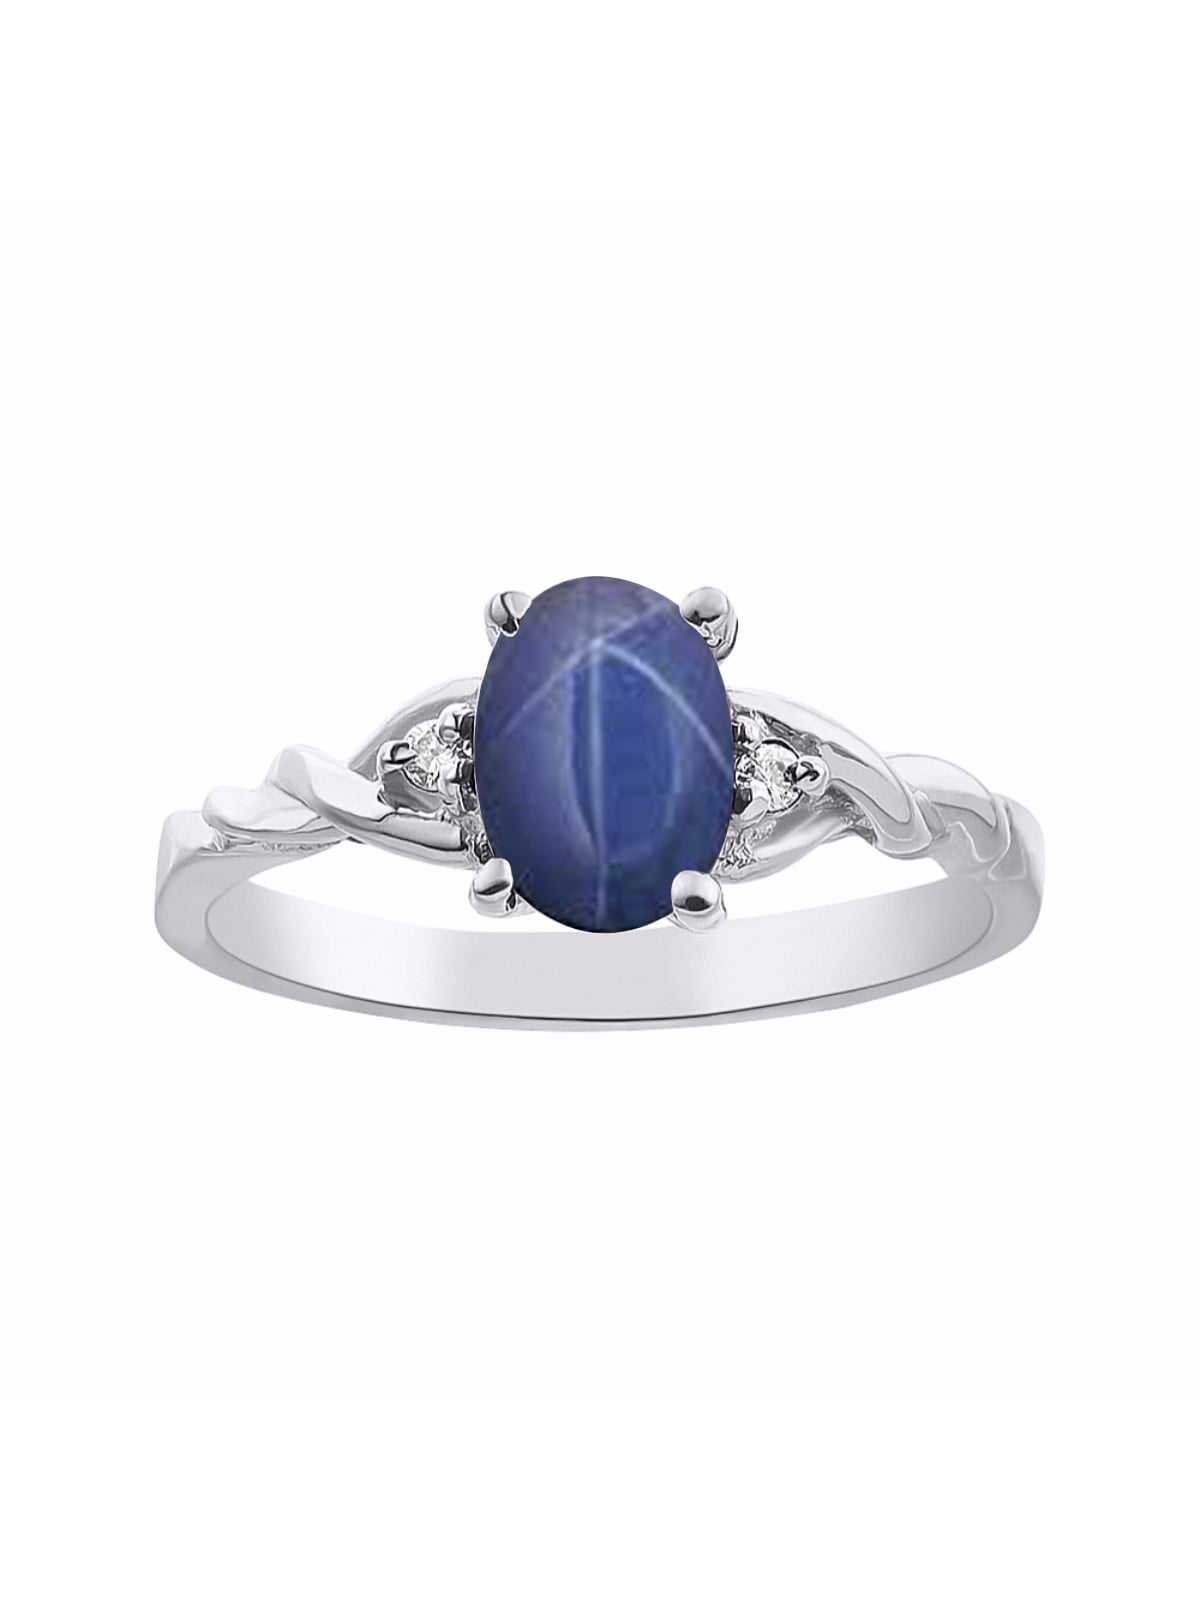 Vintage Blue Star Sapphire Ring Gift For All Gemstone Handmade Ring Statement Lindy Star Ring 925 Sterling Silver Dainty Promise Ring